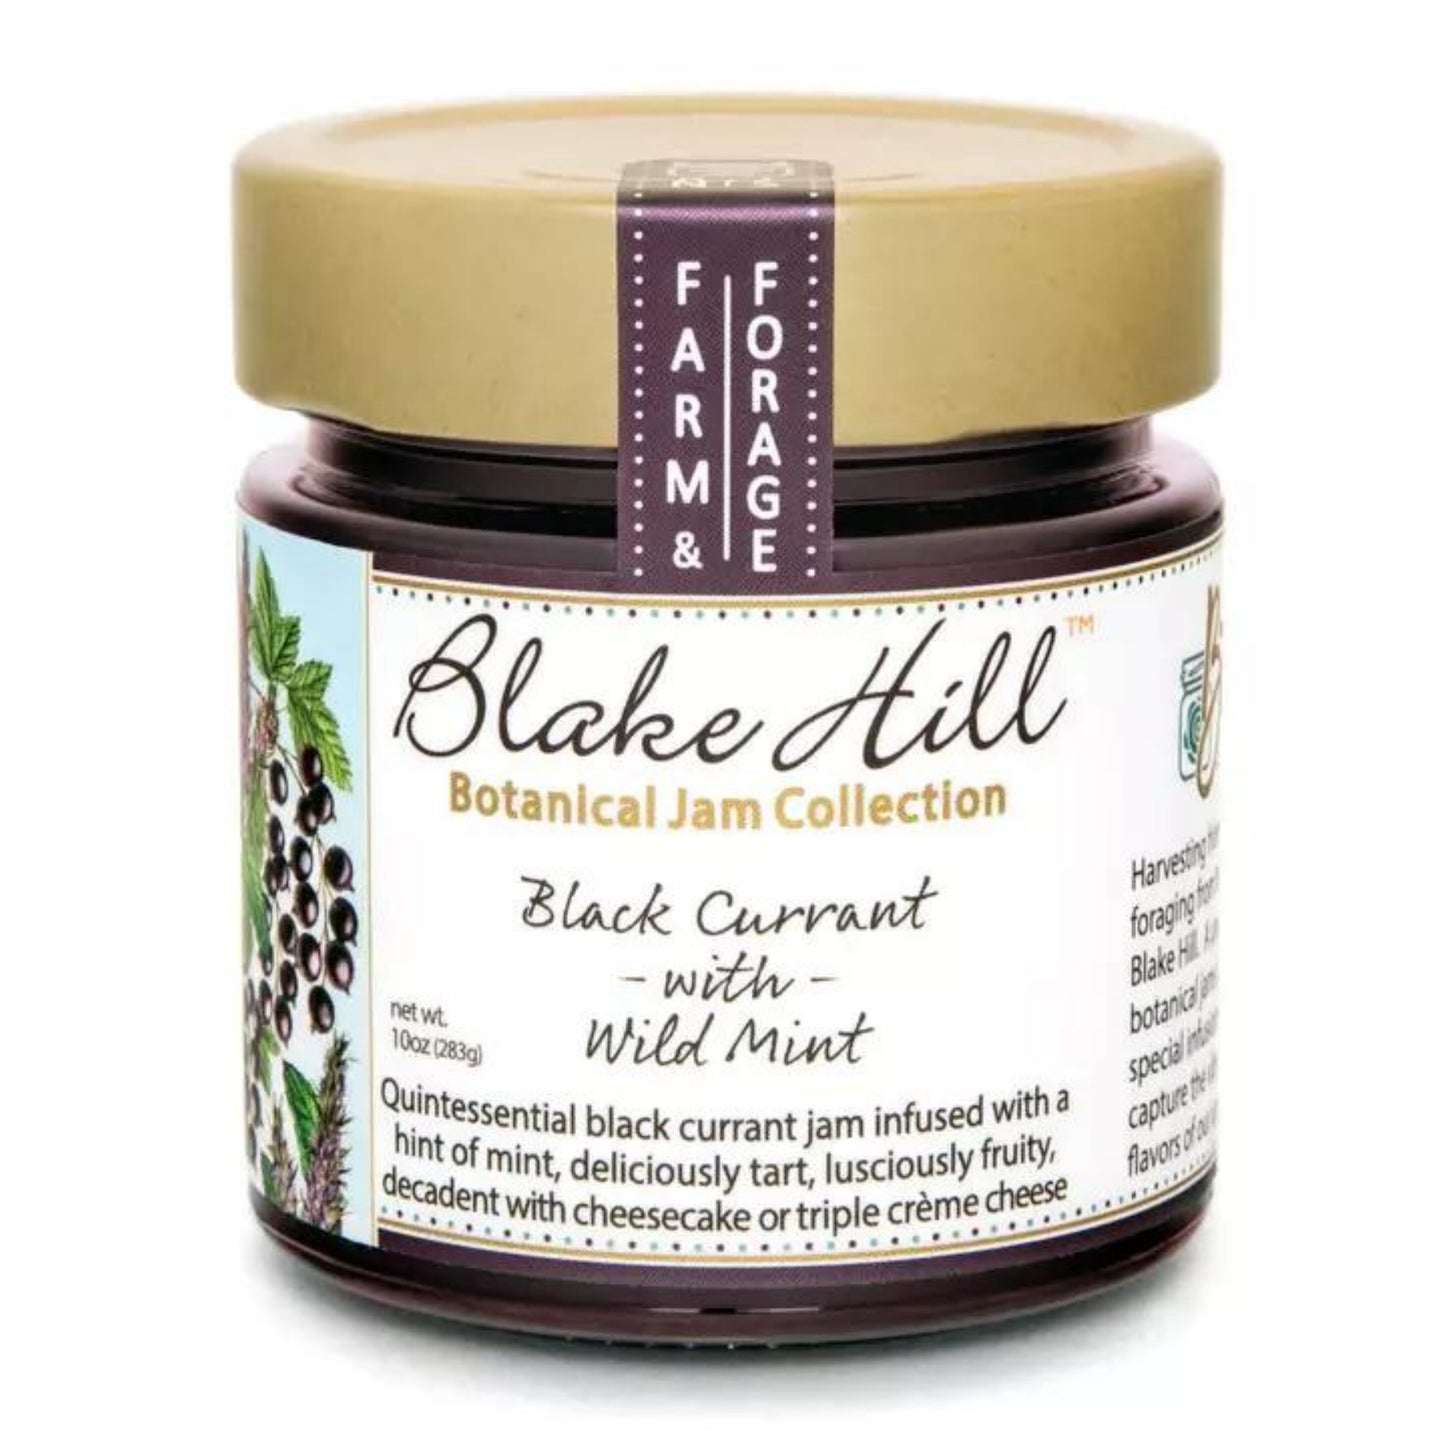 Botanical Jam Collection- Black Currant with Wild Mint